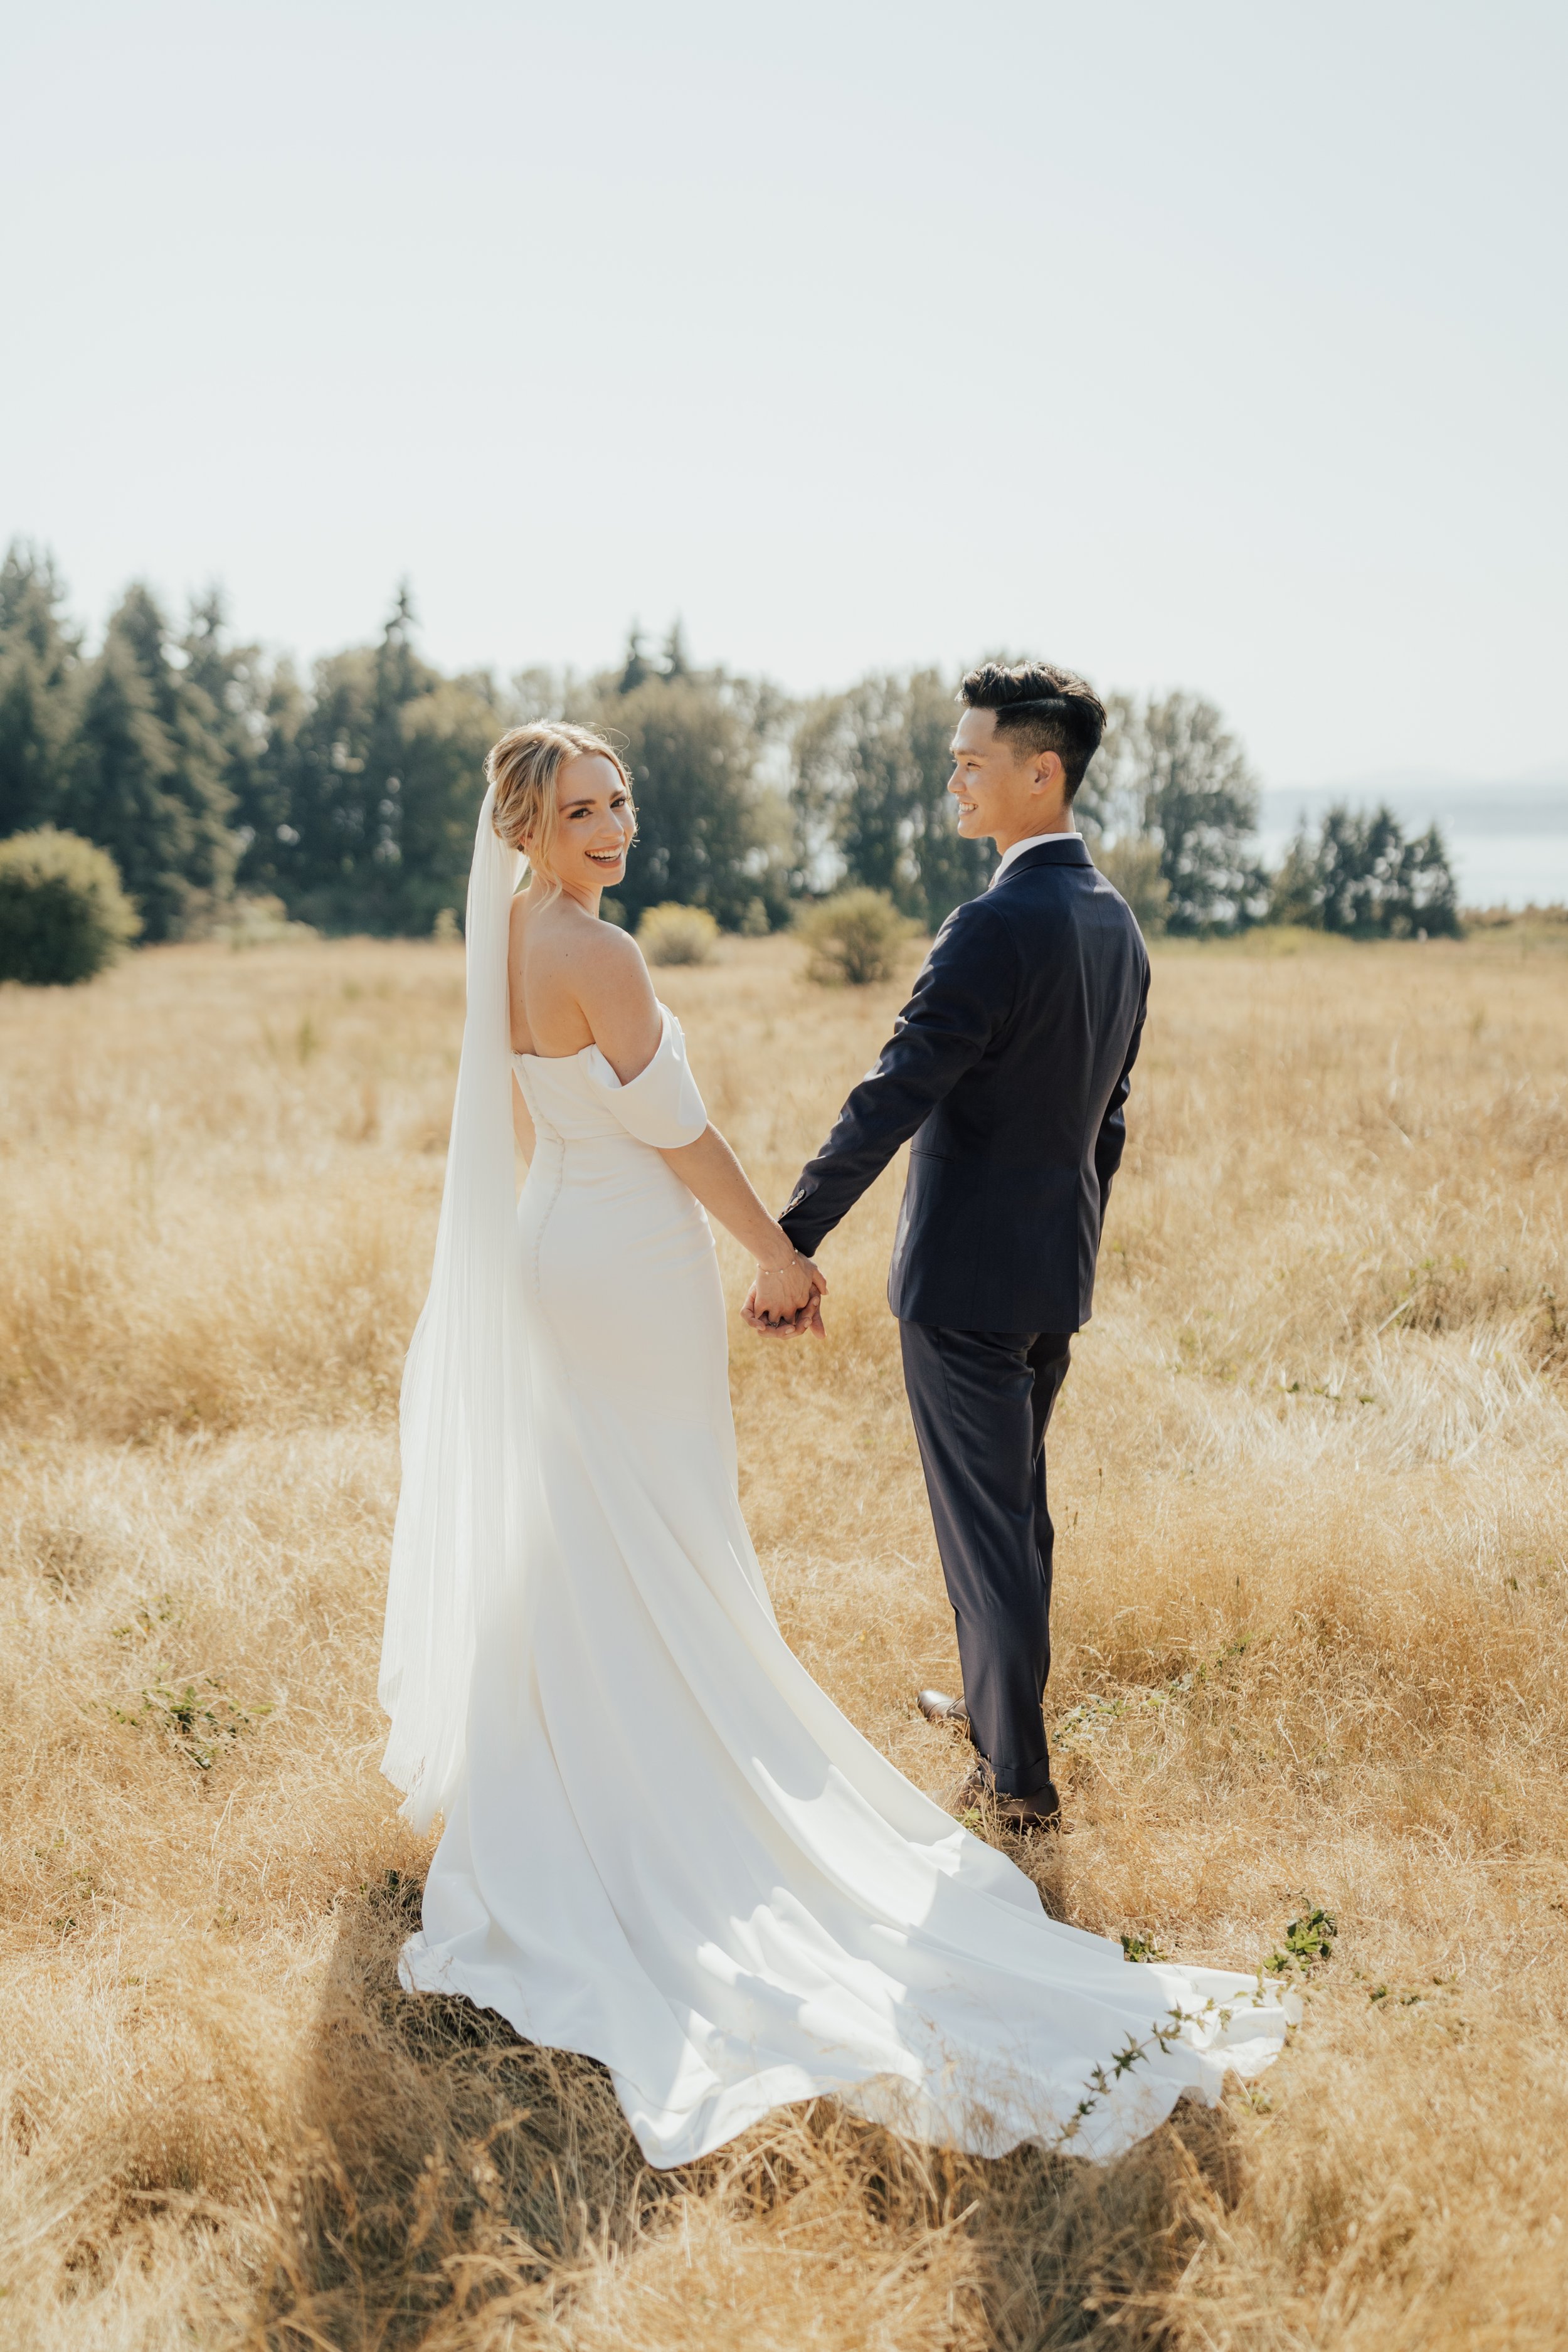 pacific-engagements-discovery-park-formal-wedding-portraits-bride-and-groom-rachel-syrisko-photography